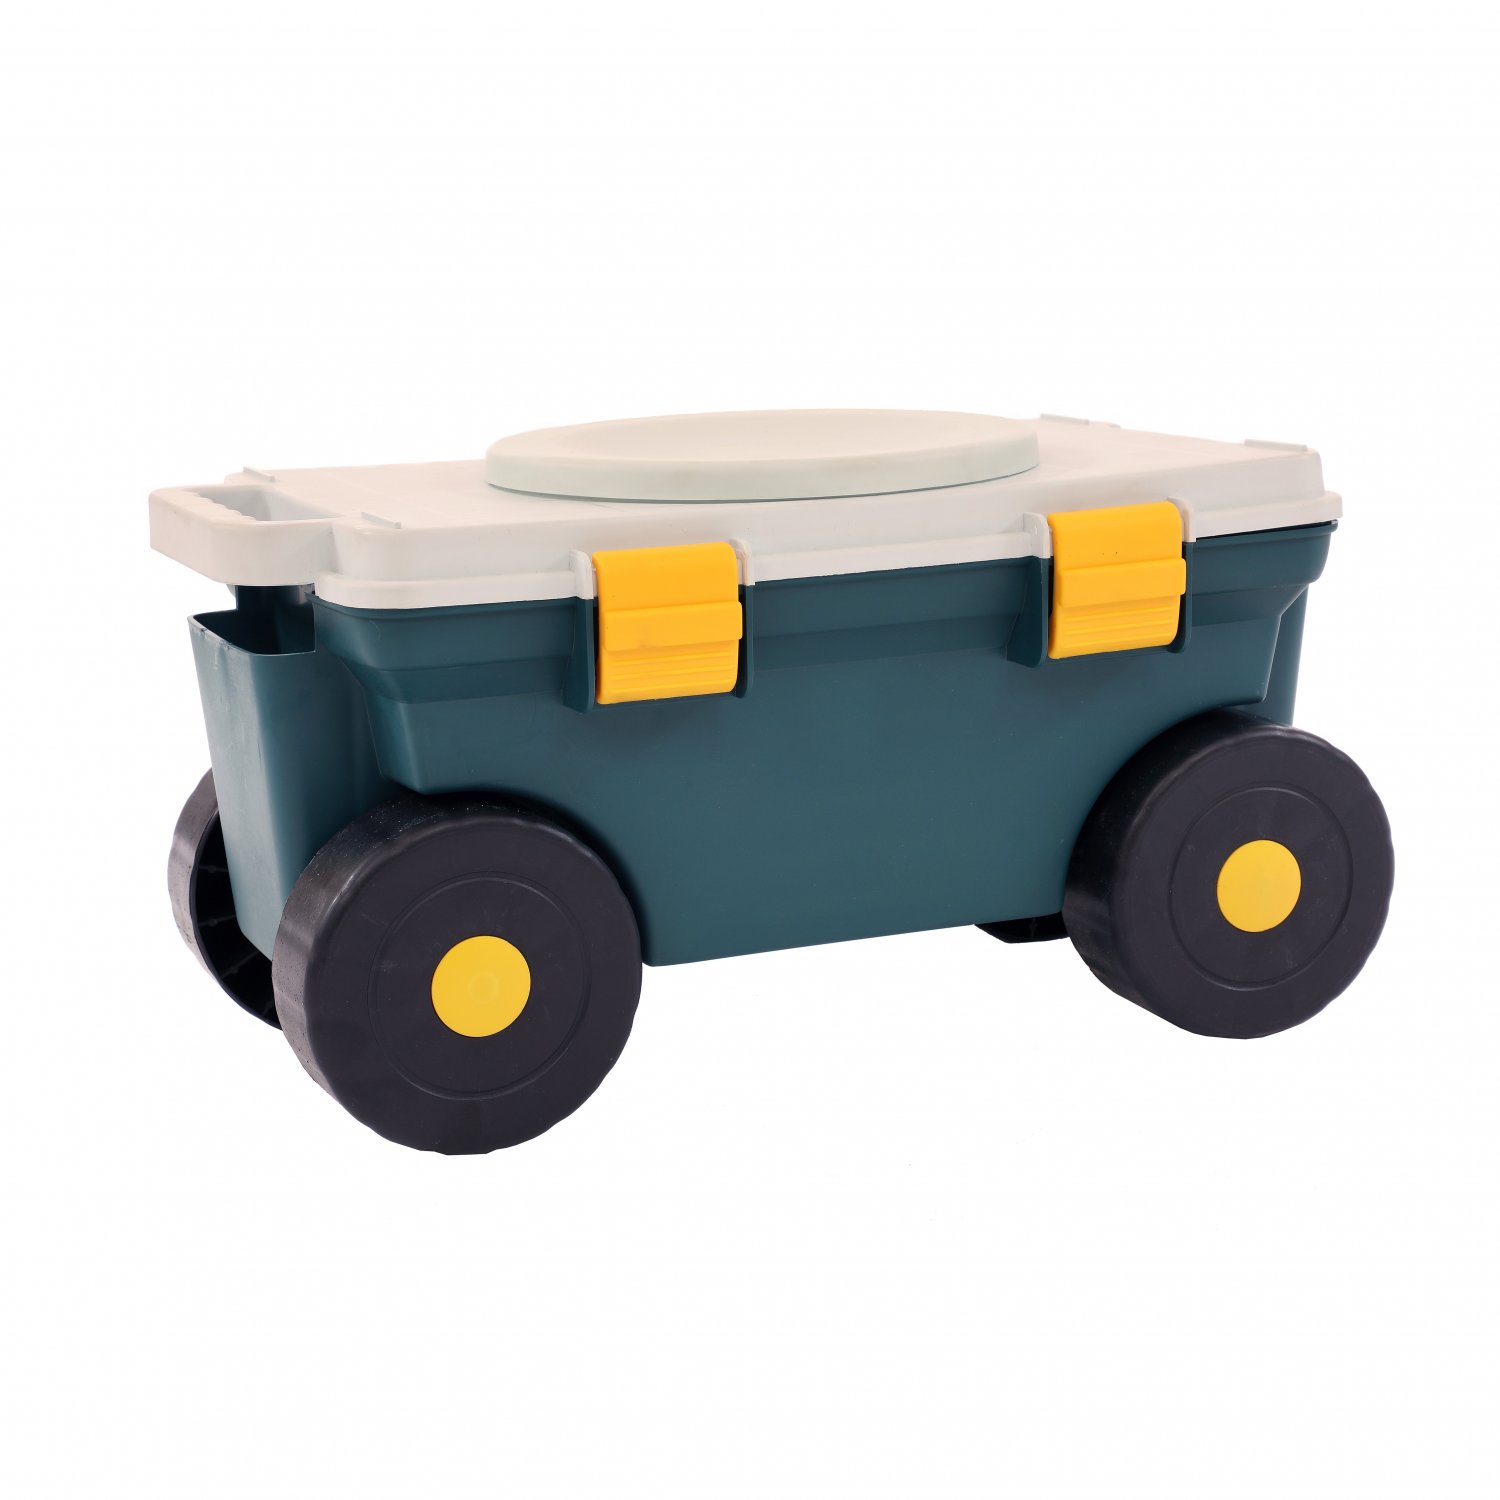 Outdoor Garden Rolling Tool Cart Storage Box With Rotating Seat